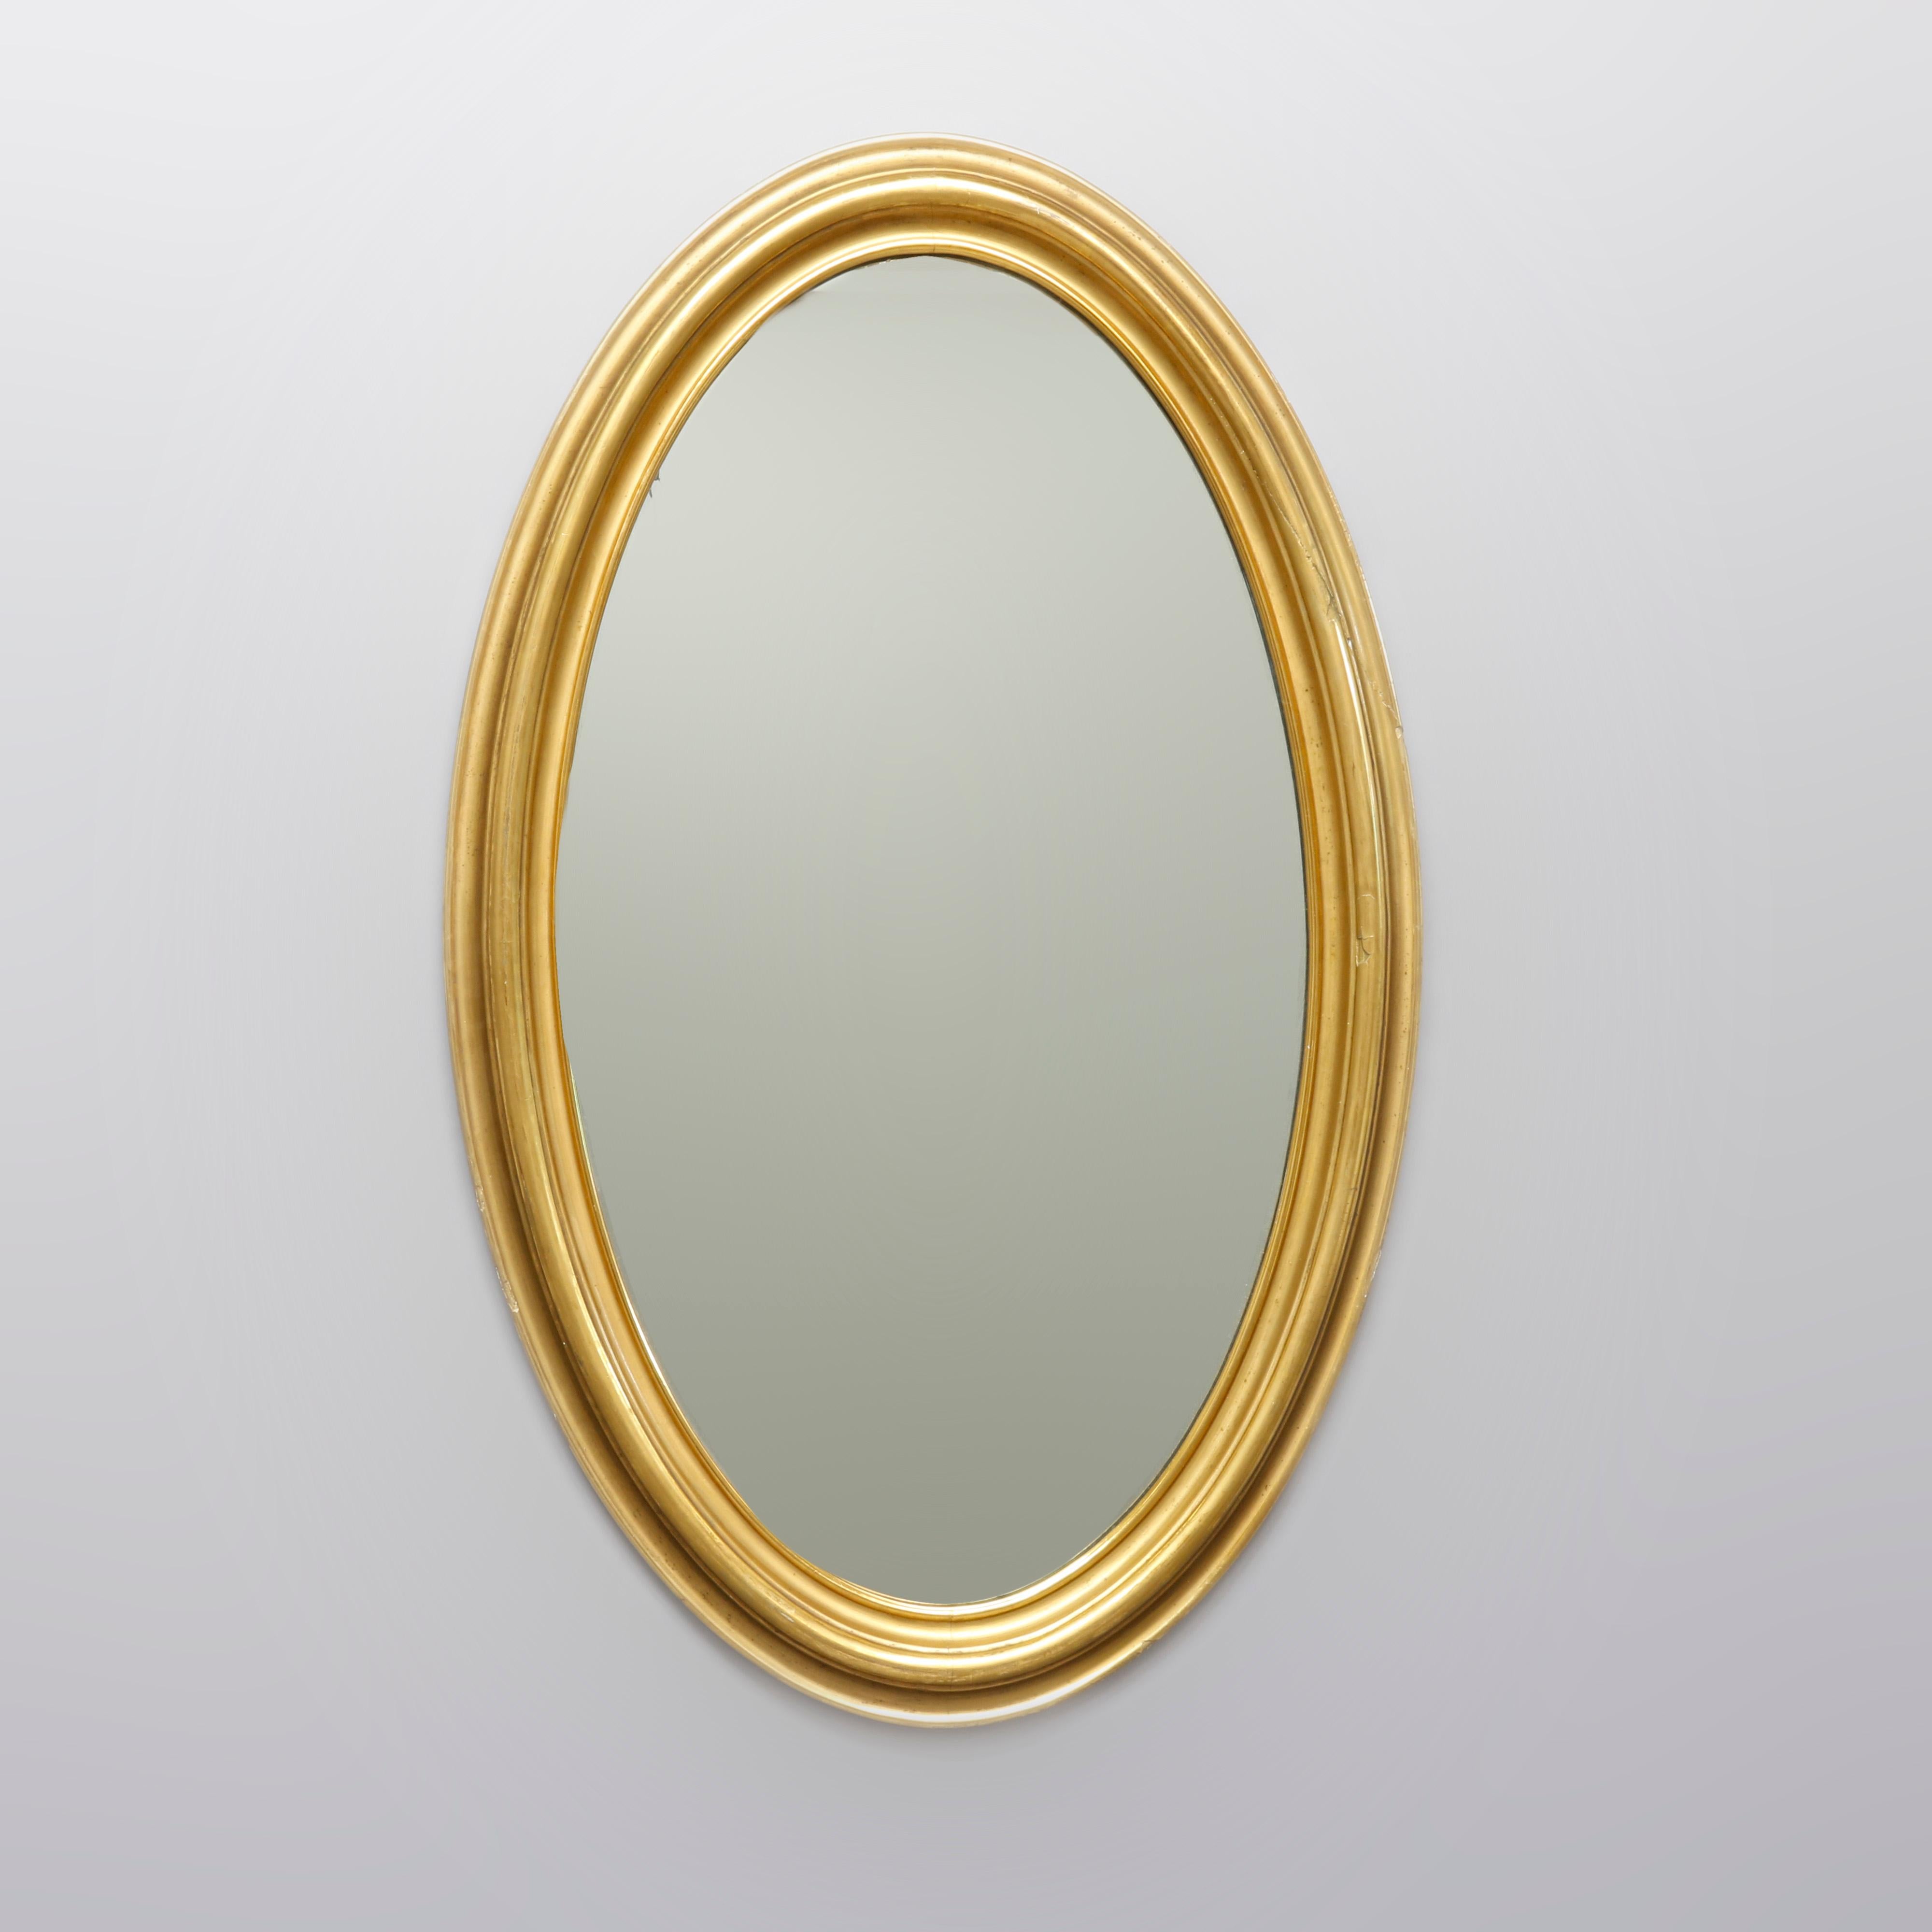 An early antique wall mirror features large giltwood oval frame, circa 1830.

Measures: 41.66